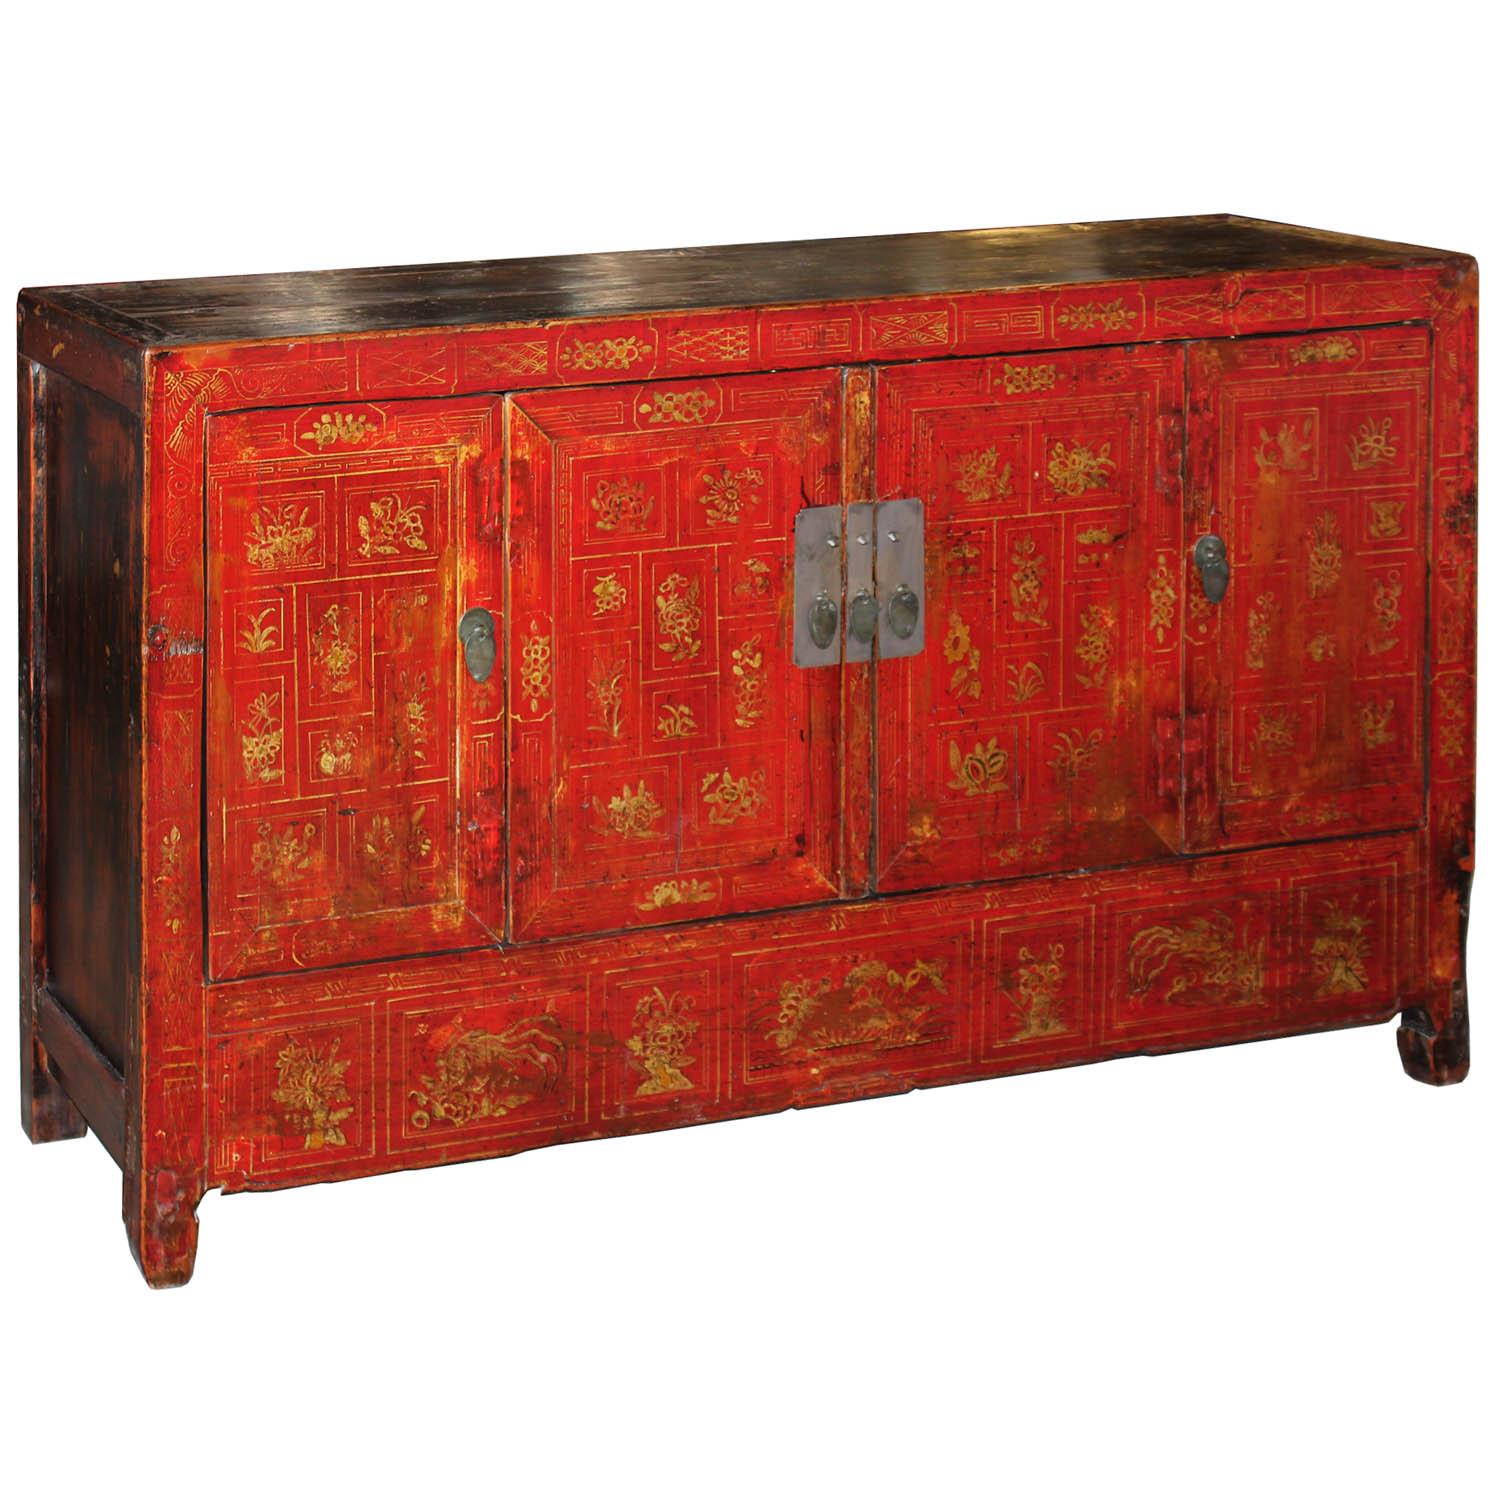 Place this elegant, bright red and gold buffet with hand-painted symbols for happiness, prosperity, and great blessings in the living room for pop of color. New interior shelf and hardware. Dongbei, China, circa 1920s.